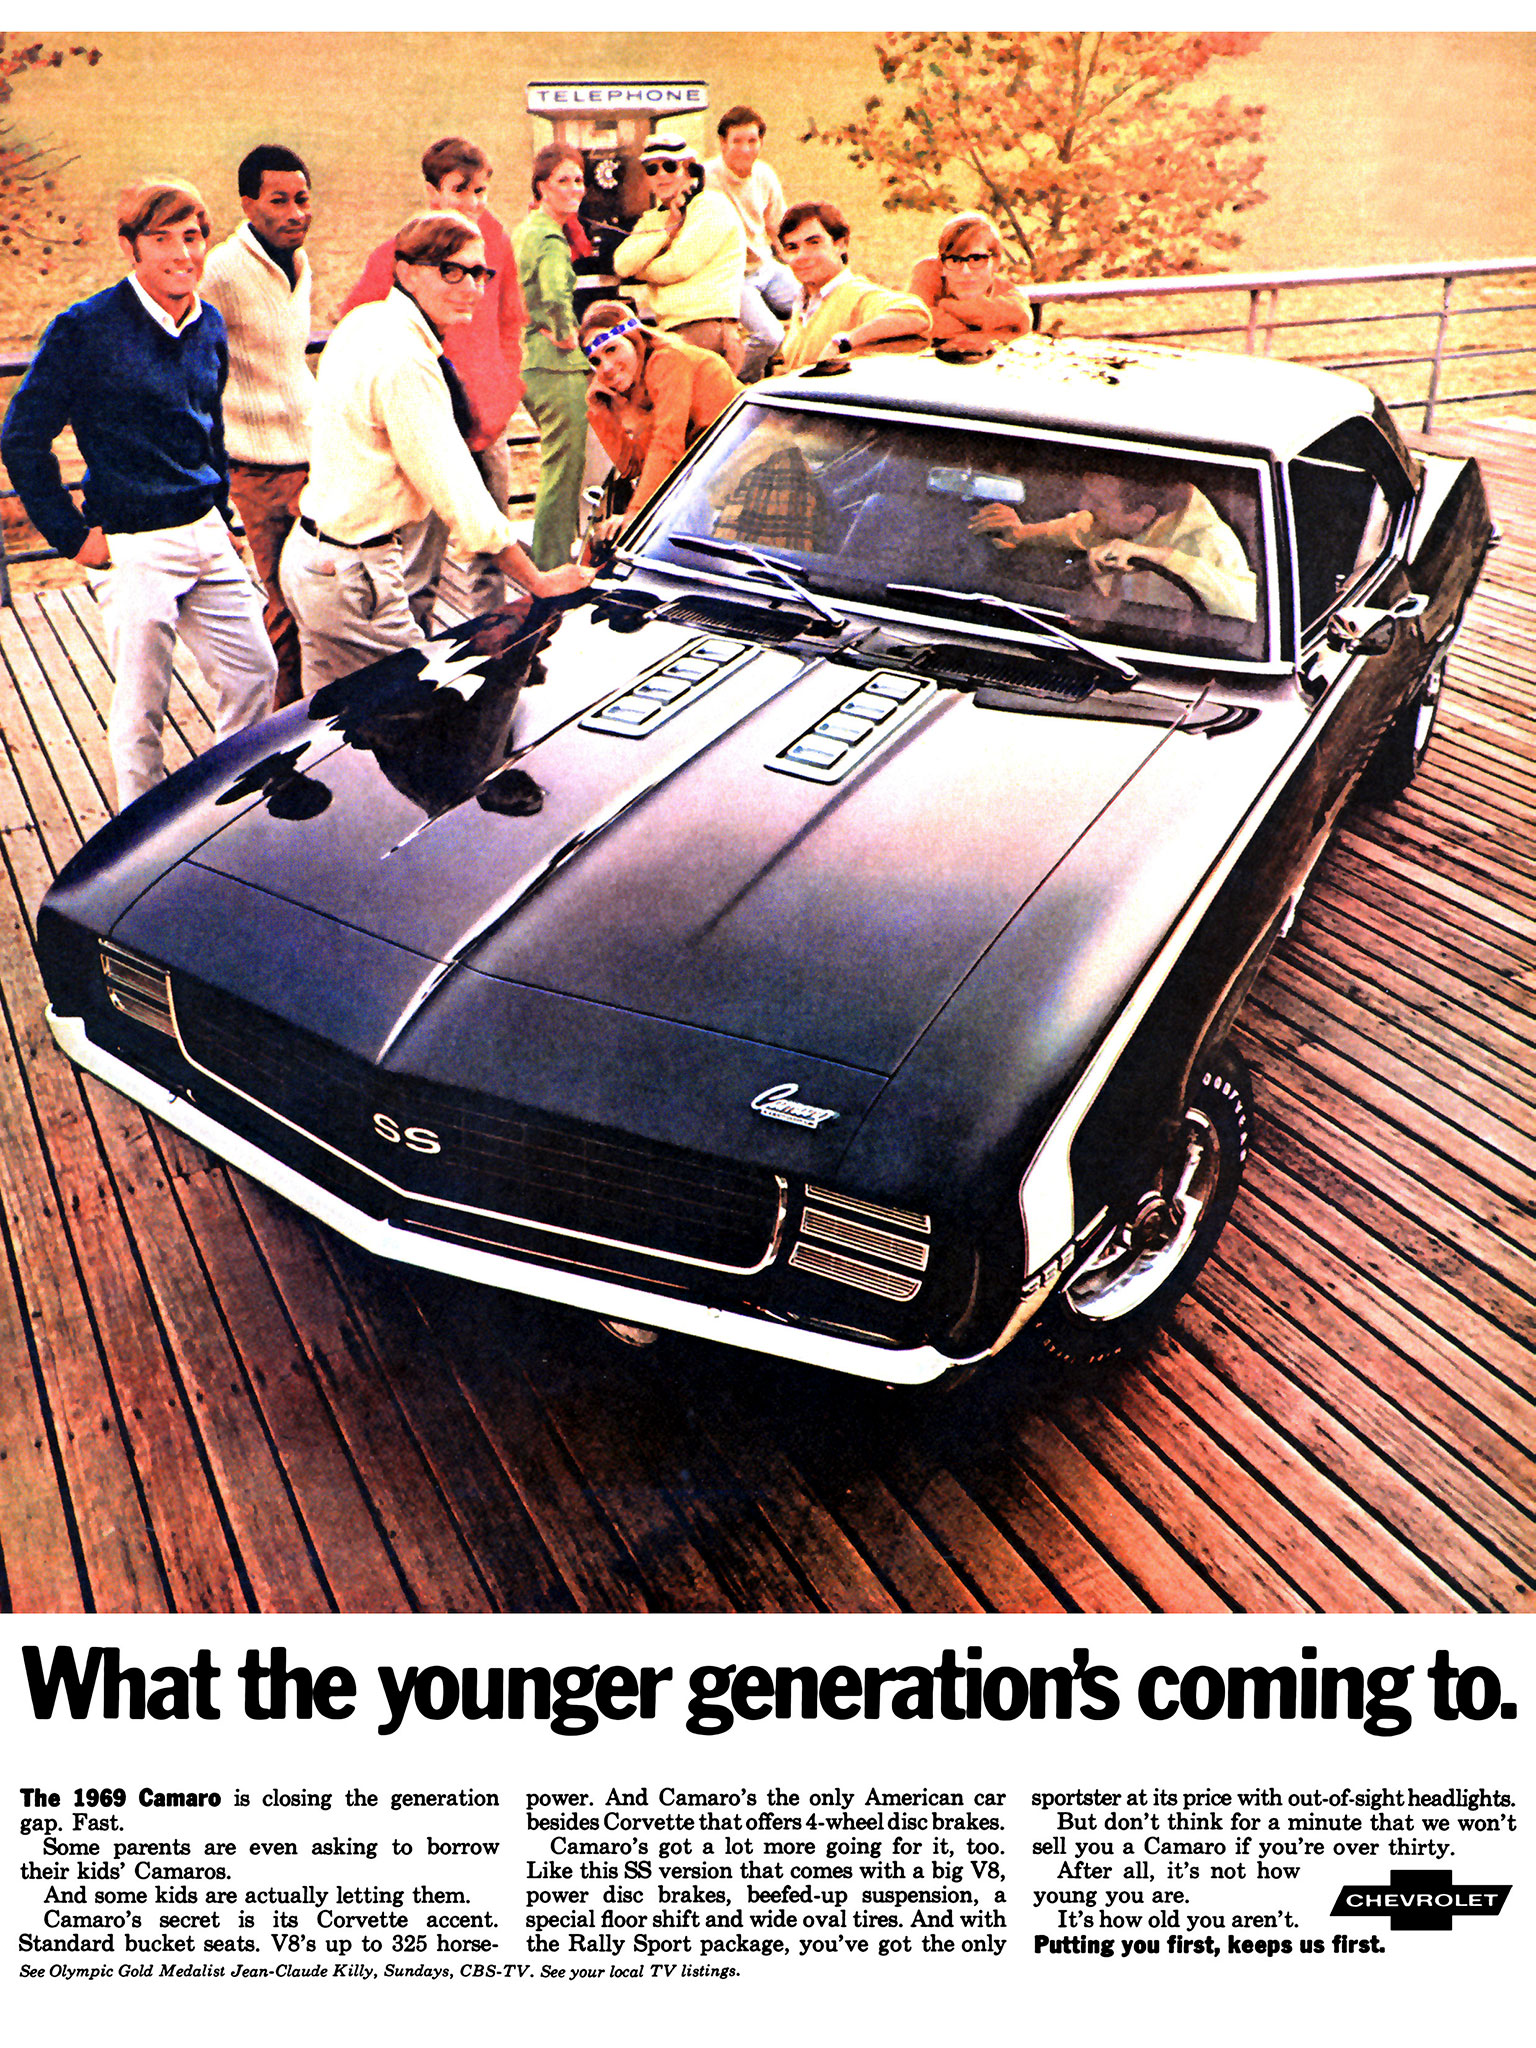 198 1969 Camaro ad what younger generation is coming to